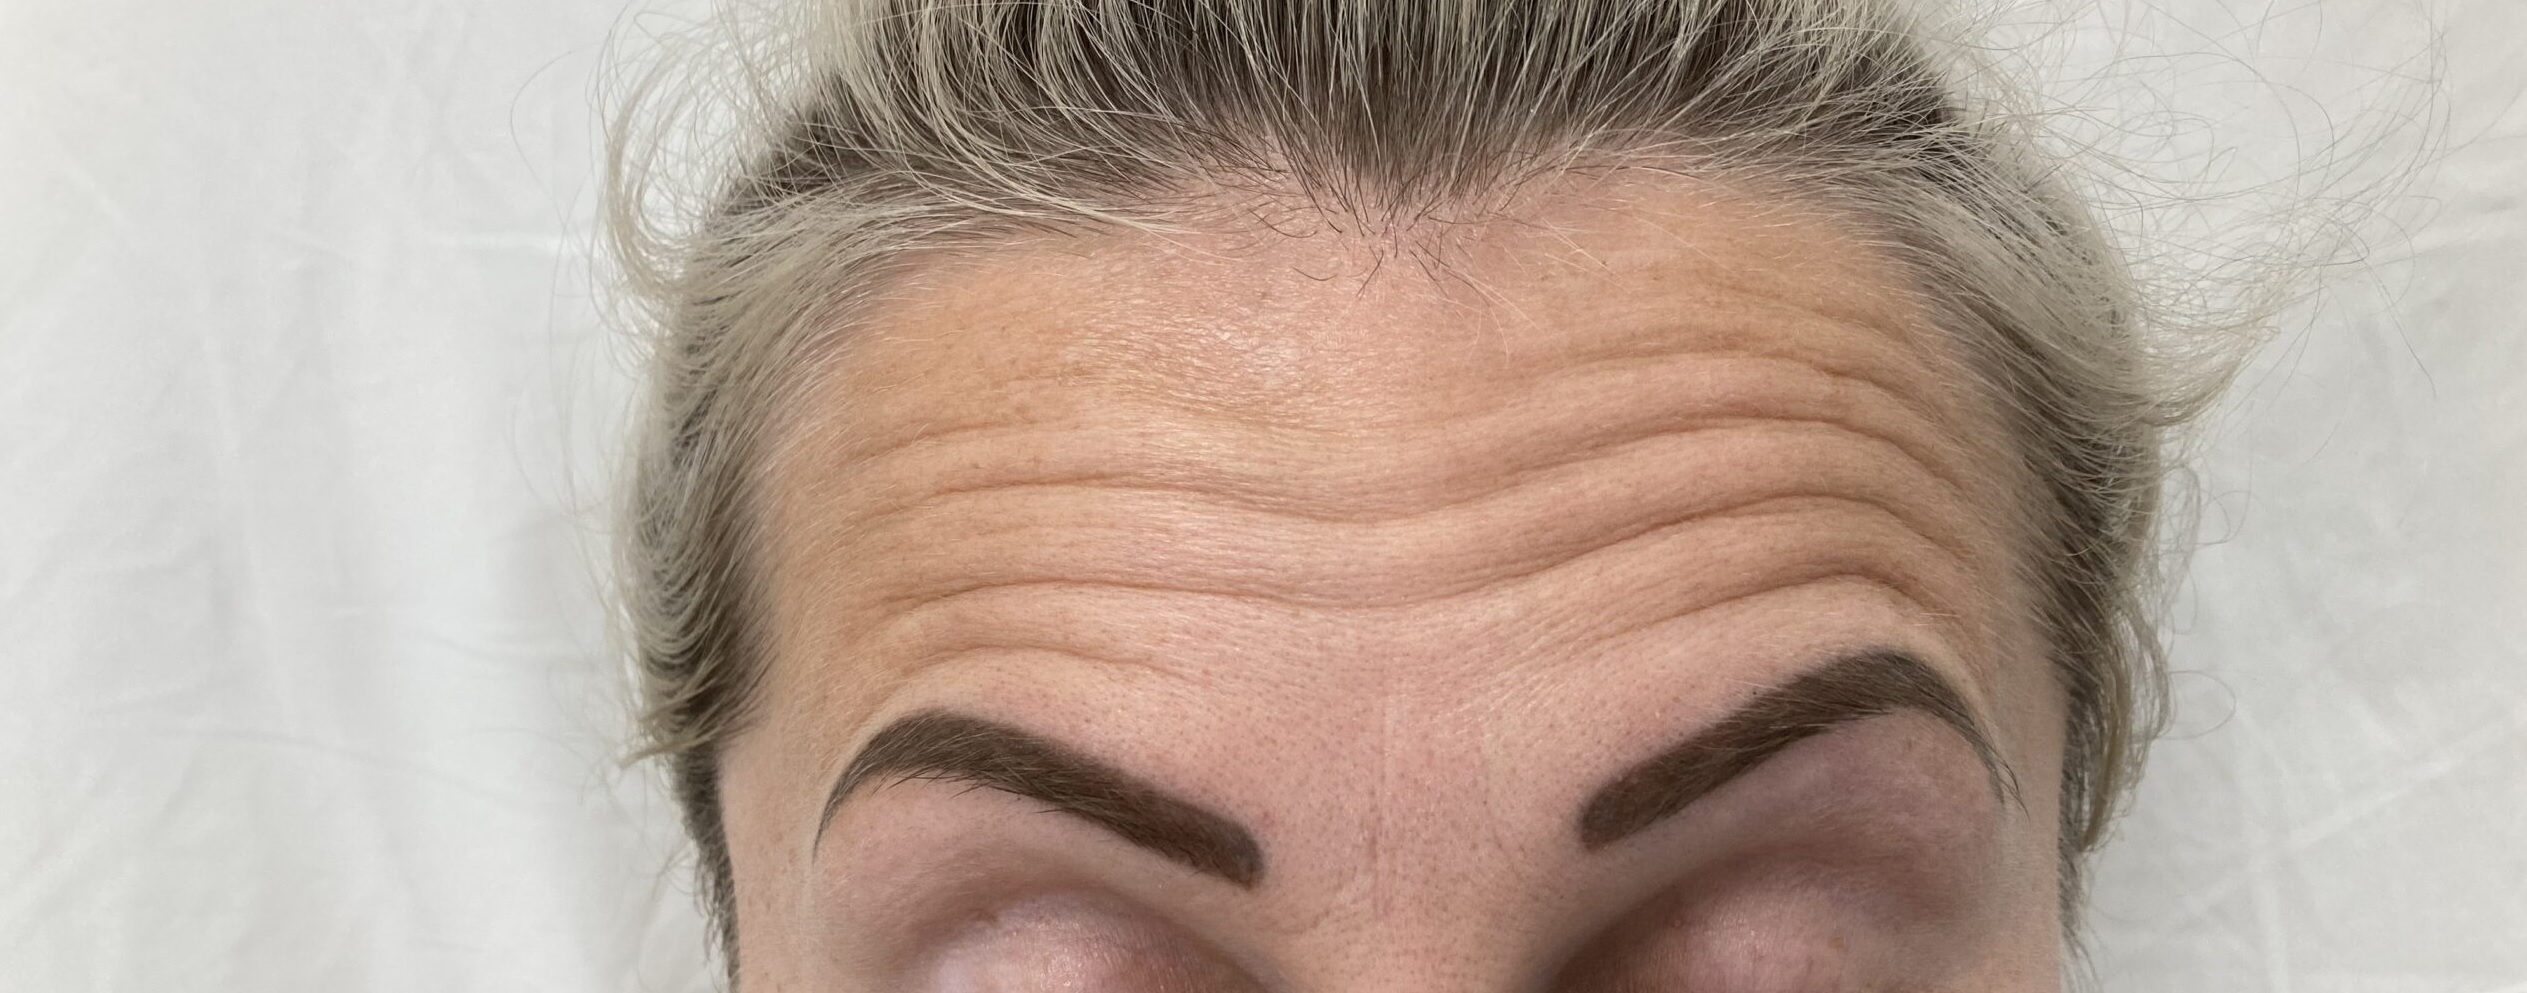 Before-Anti-Wrinkle Injections